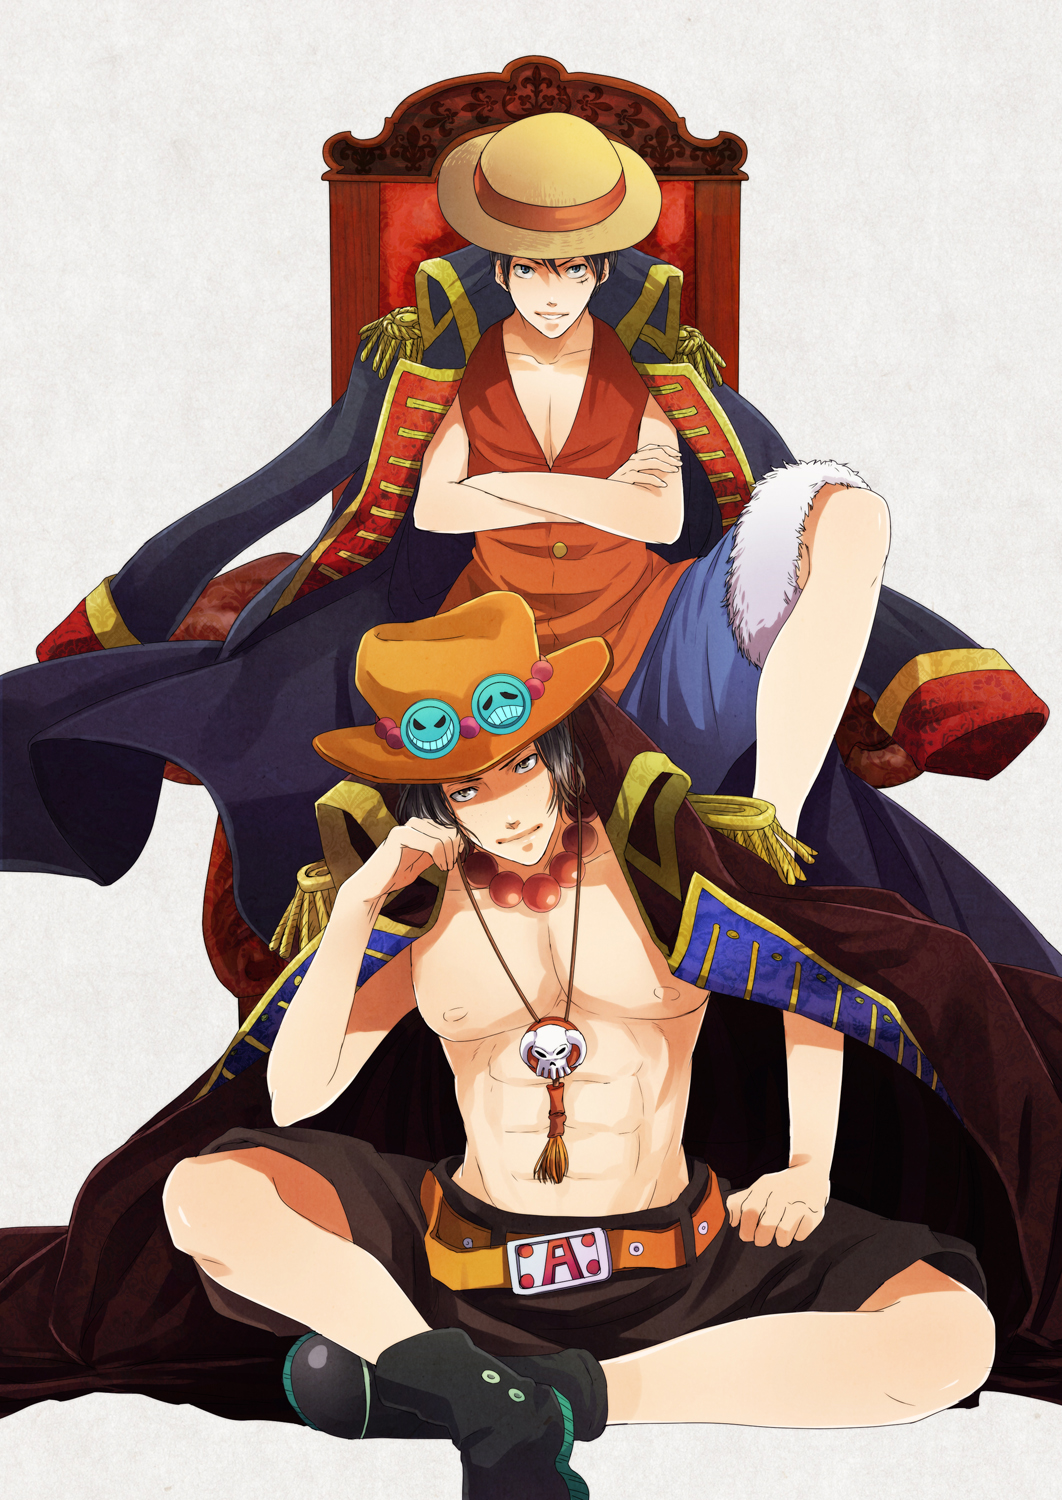 Portgas D Ace And Monkey D Luffy - HD Wallpaper 